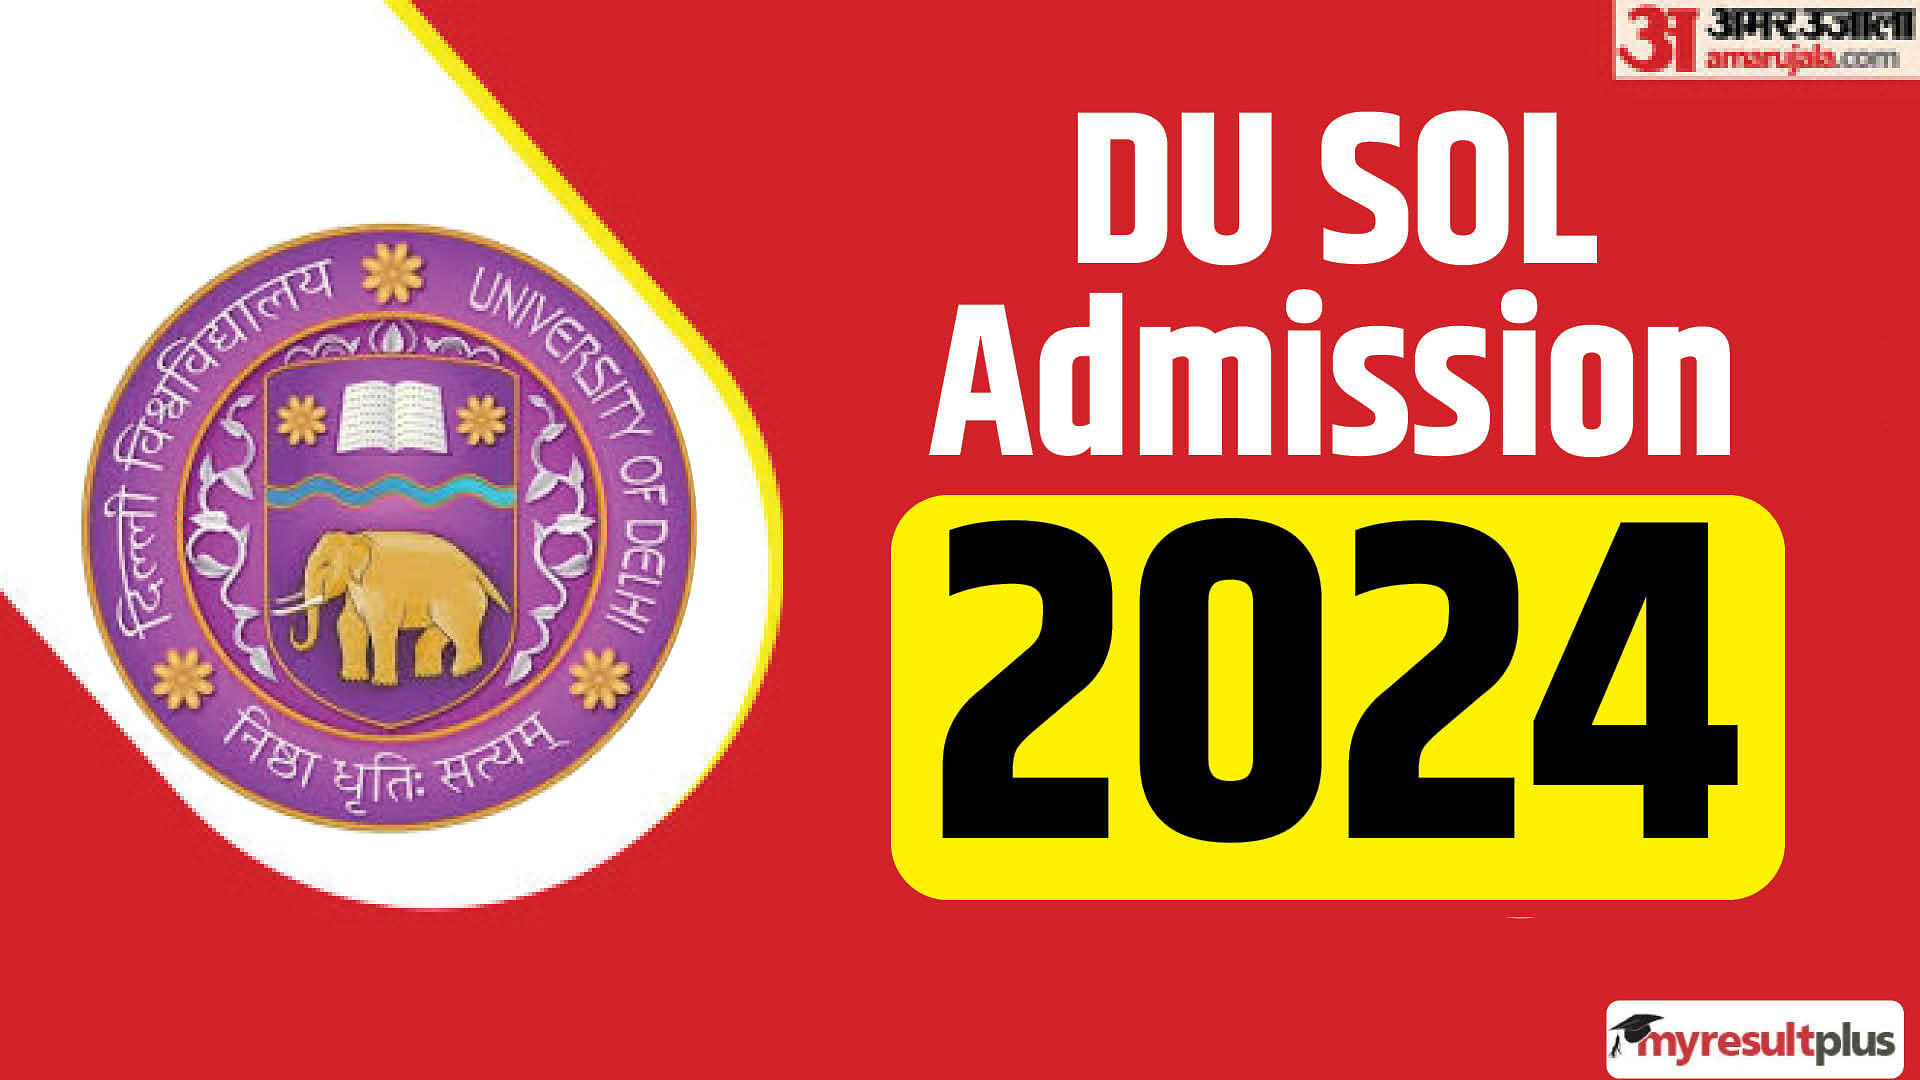 DU SOL Admission 2024 Registration window for PG, MBA programs open now; Read about eligibility criteria here